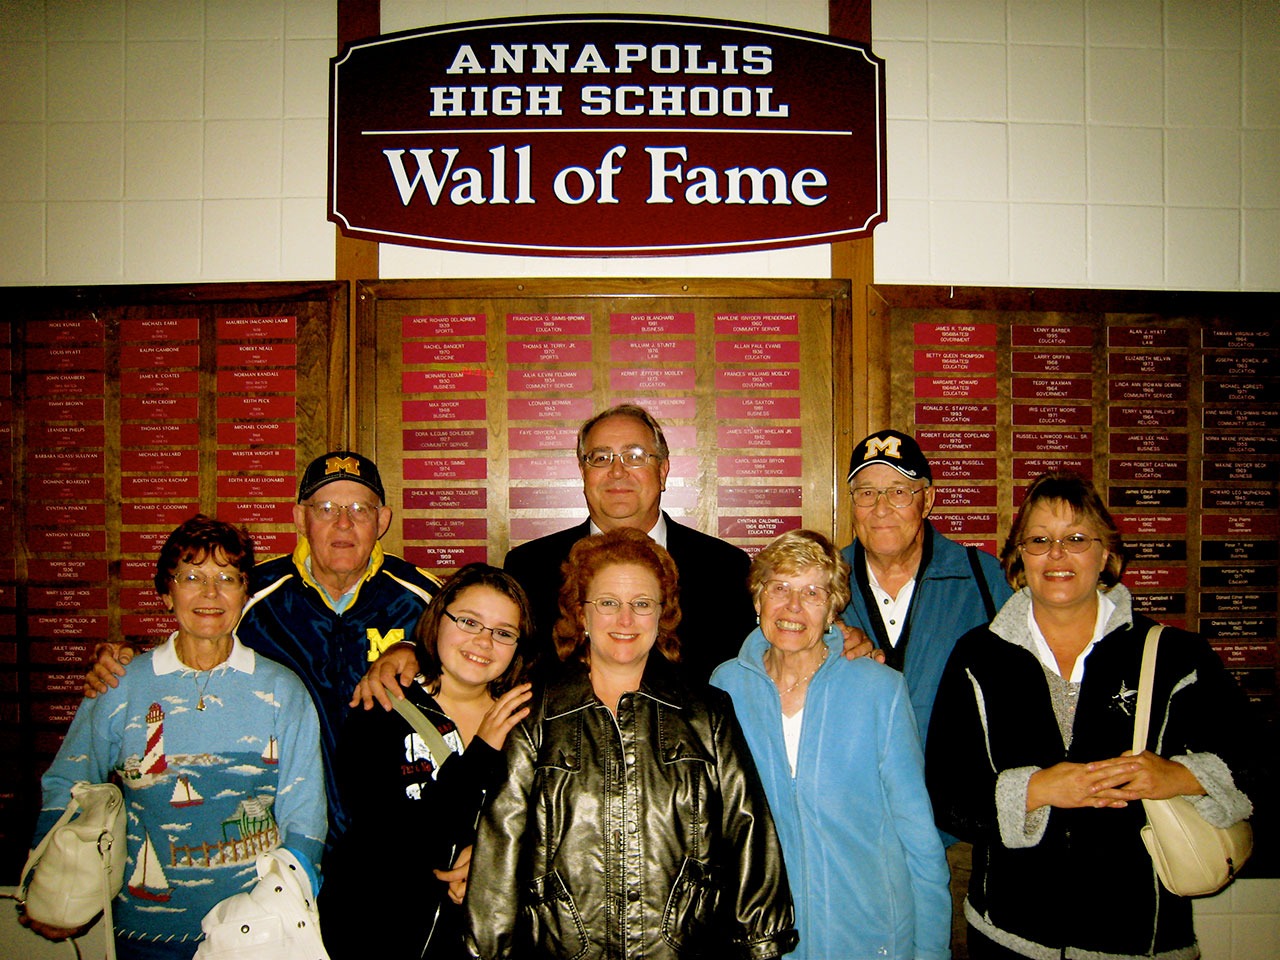 Annapolis High School Hall of Fame